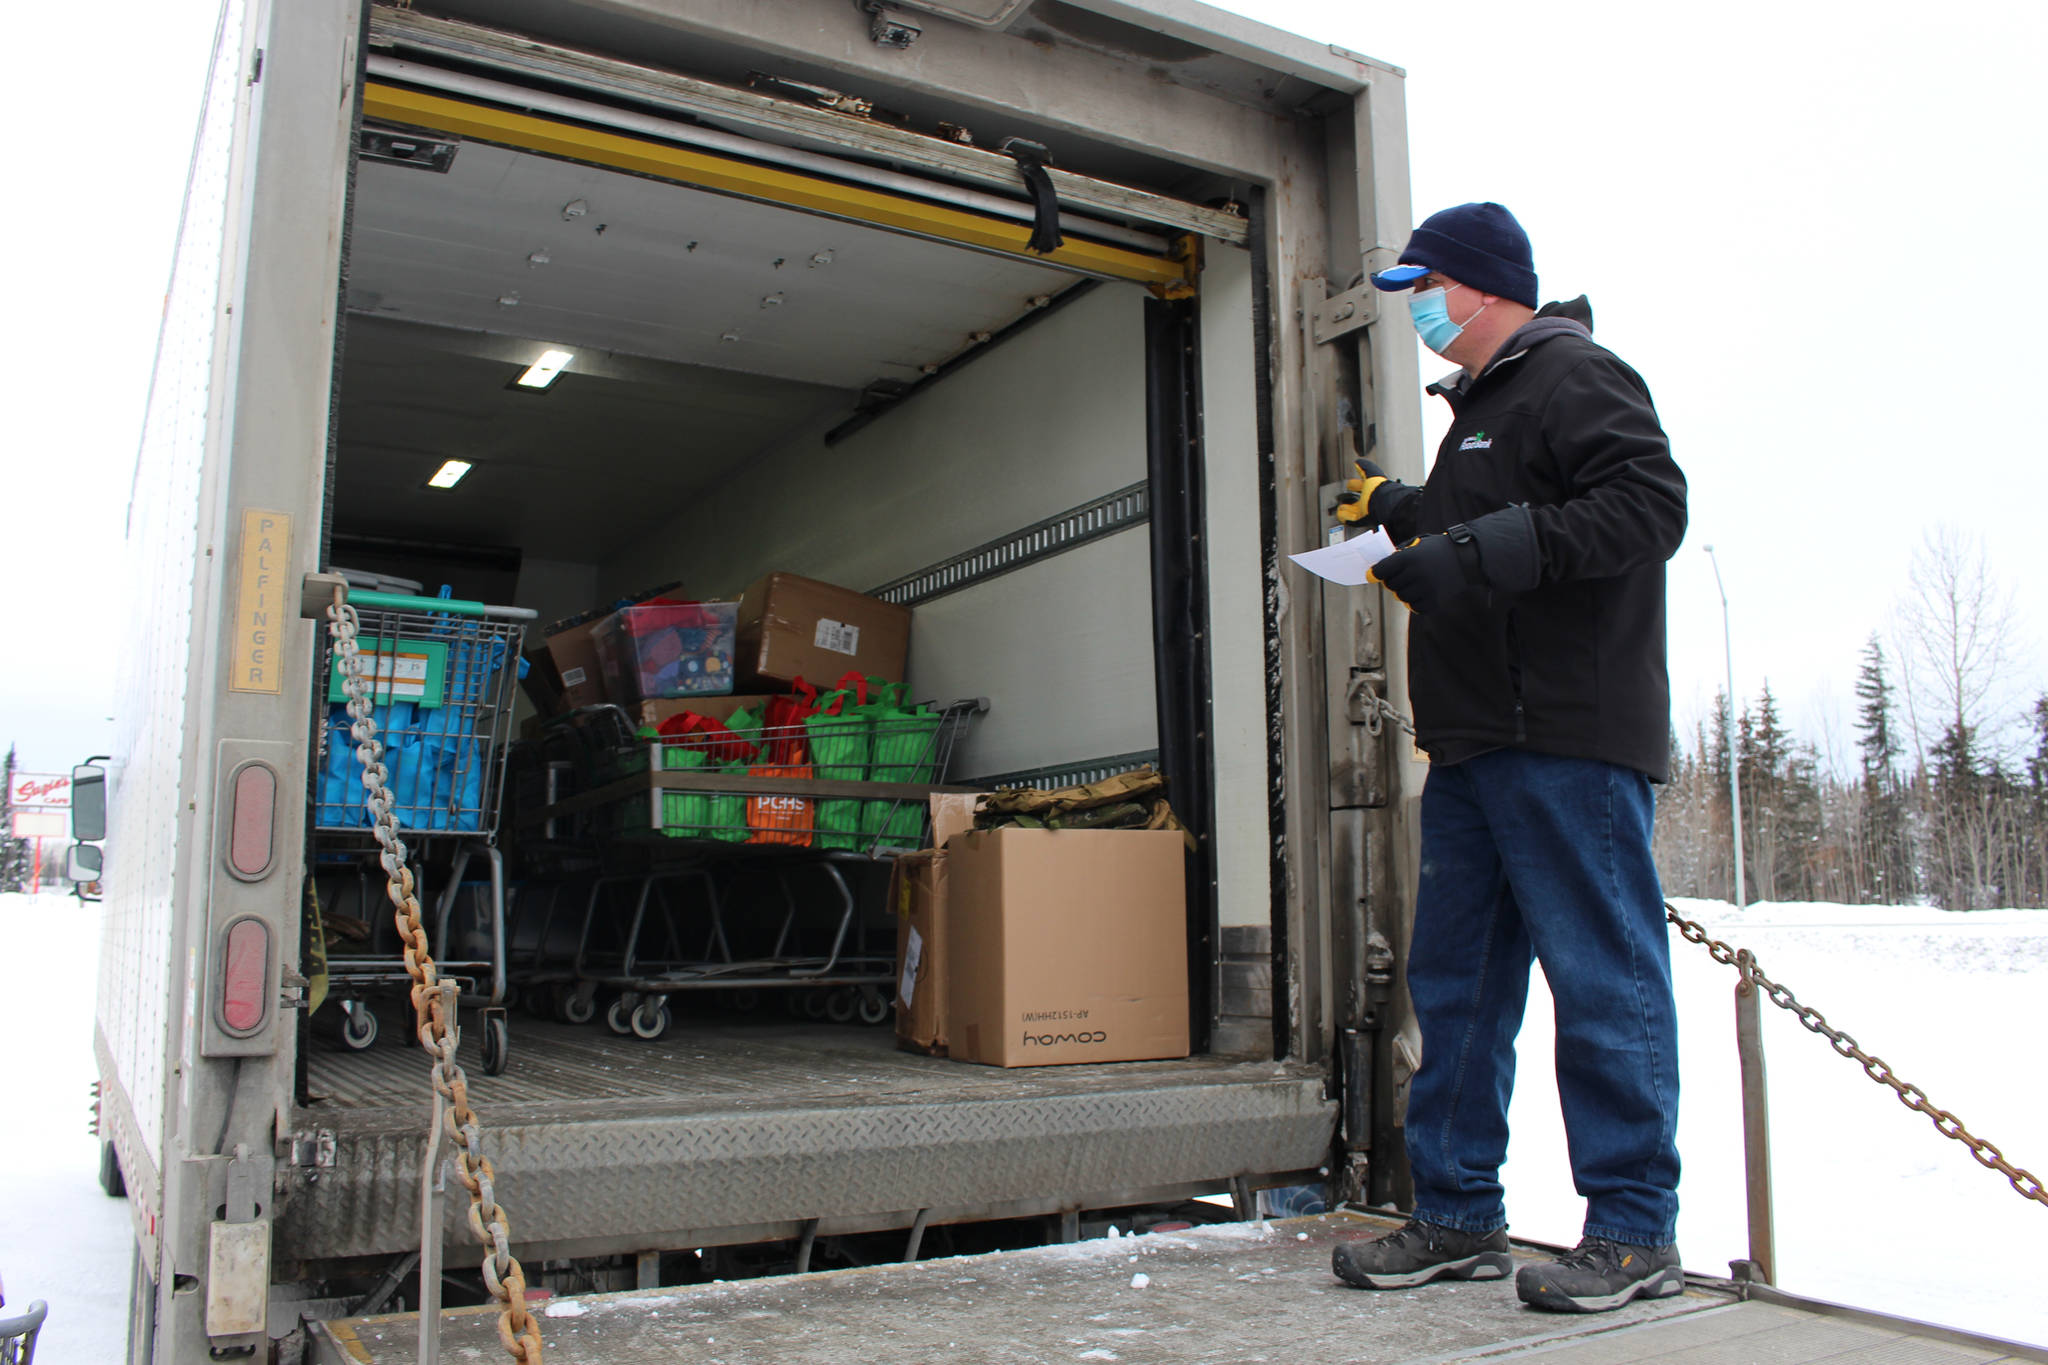 Roy Phillips unloads food and supplies for Project Homeless Connect at the Sterling Senior Citizens Center in Sterling, Alaska, on Feb. 2, 2021. (Photo by Brian Mazurek/Peninsula Clarion)